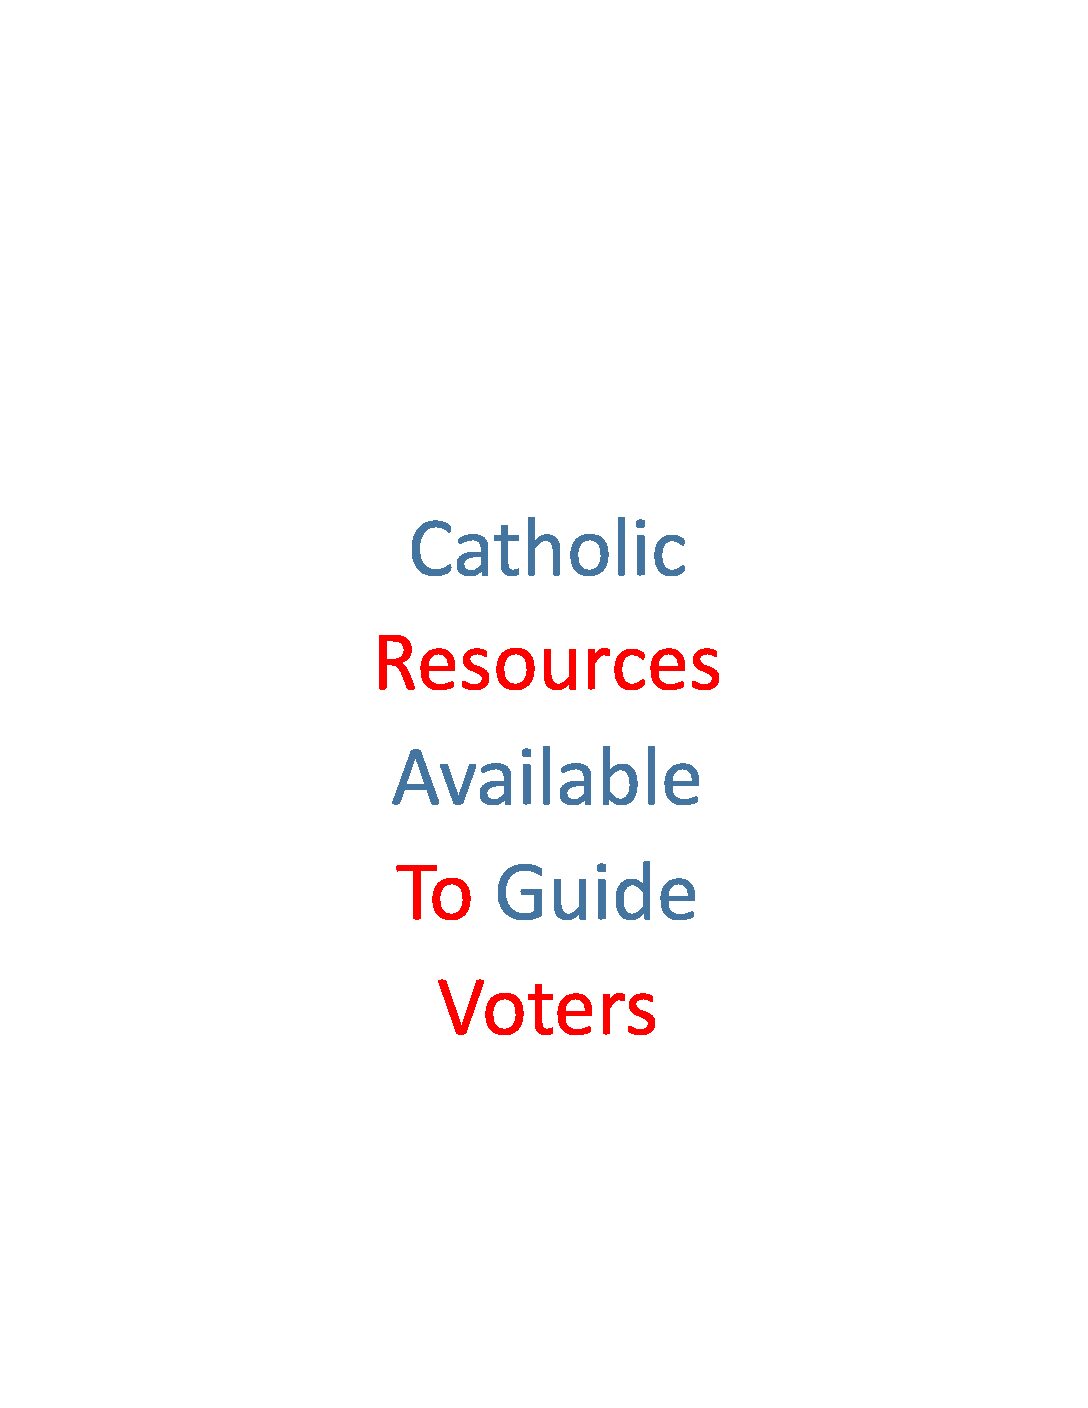 Catholic resources available to guide voters